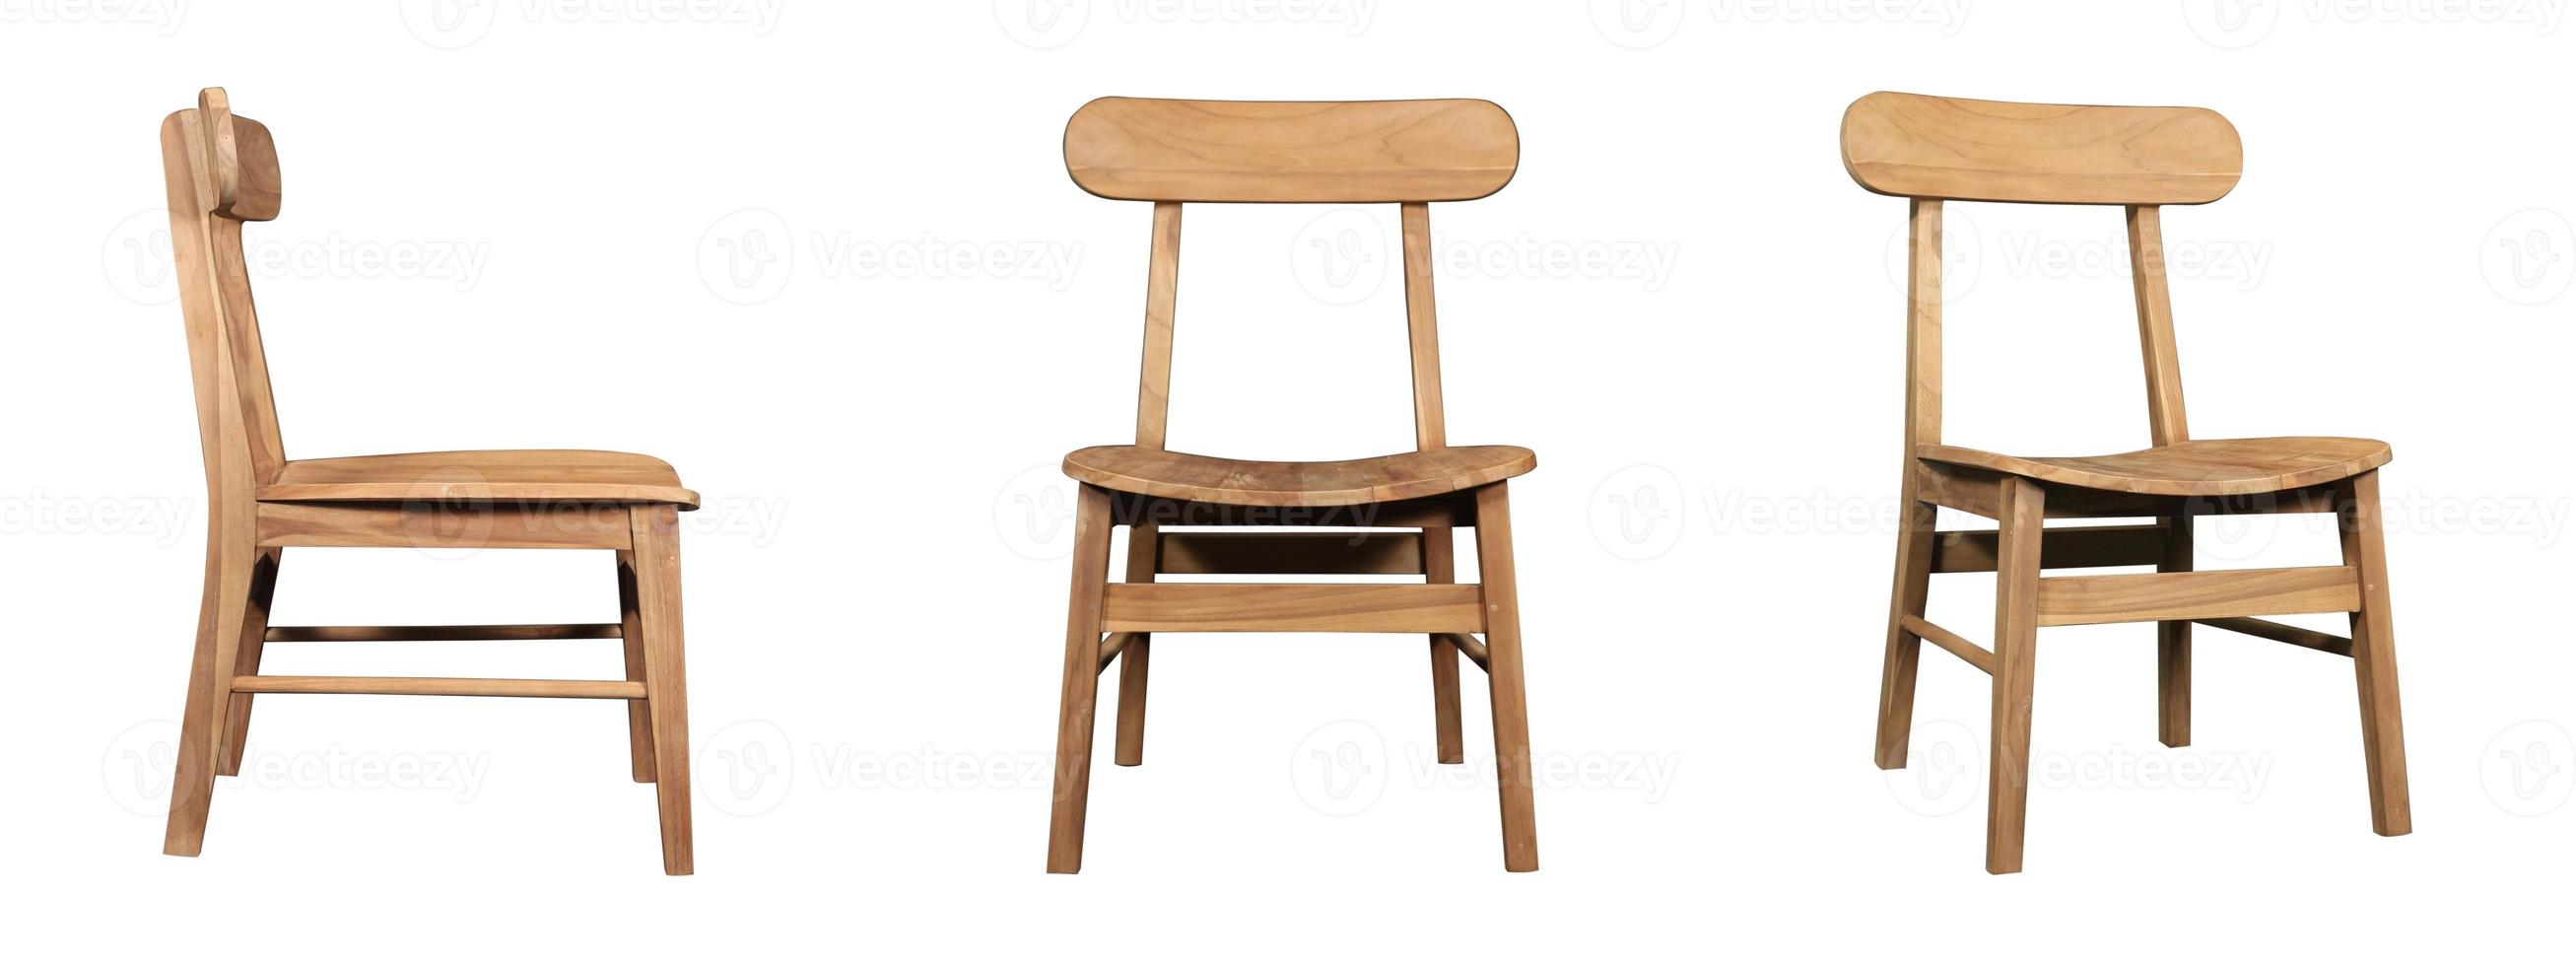 Single wood chair at different angles isolated on white background. series of furniture photo